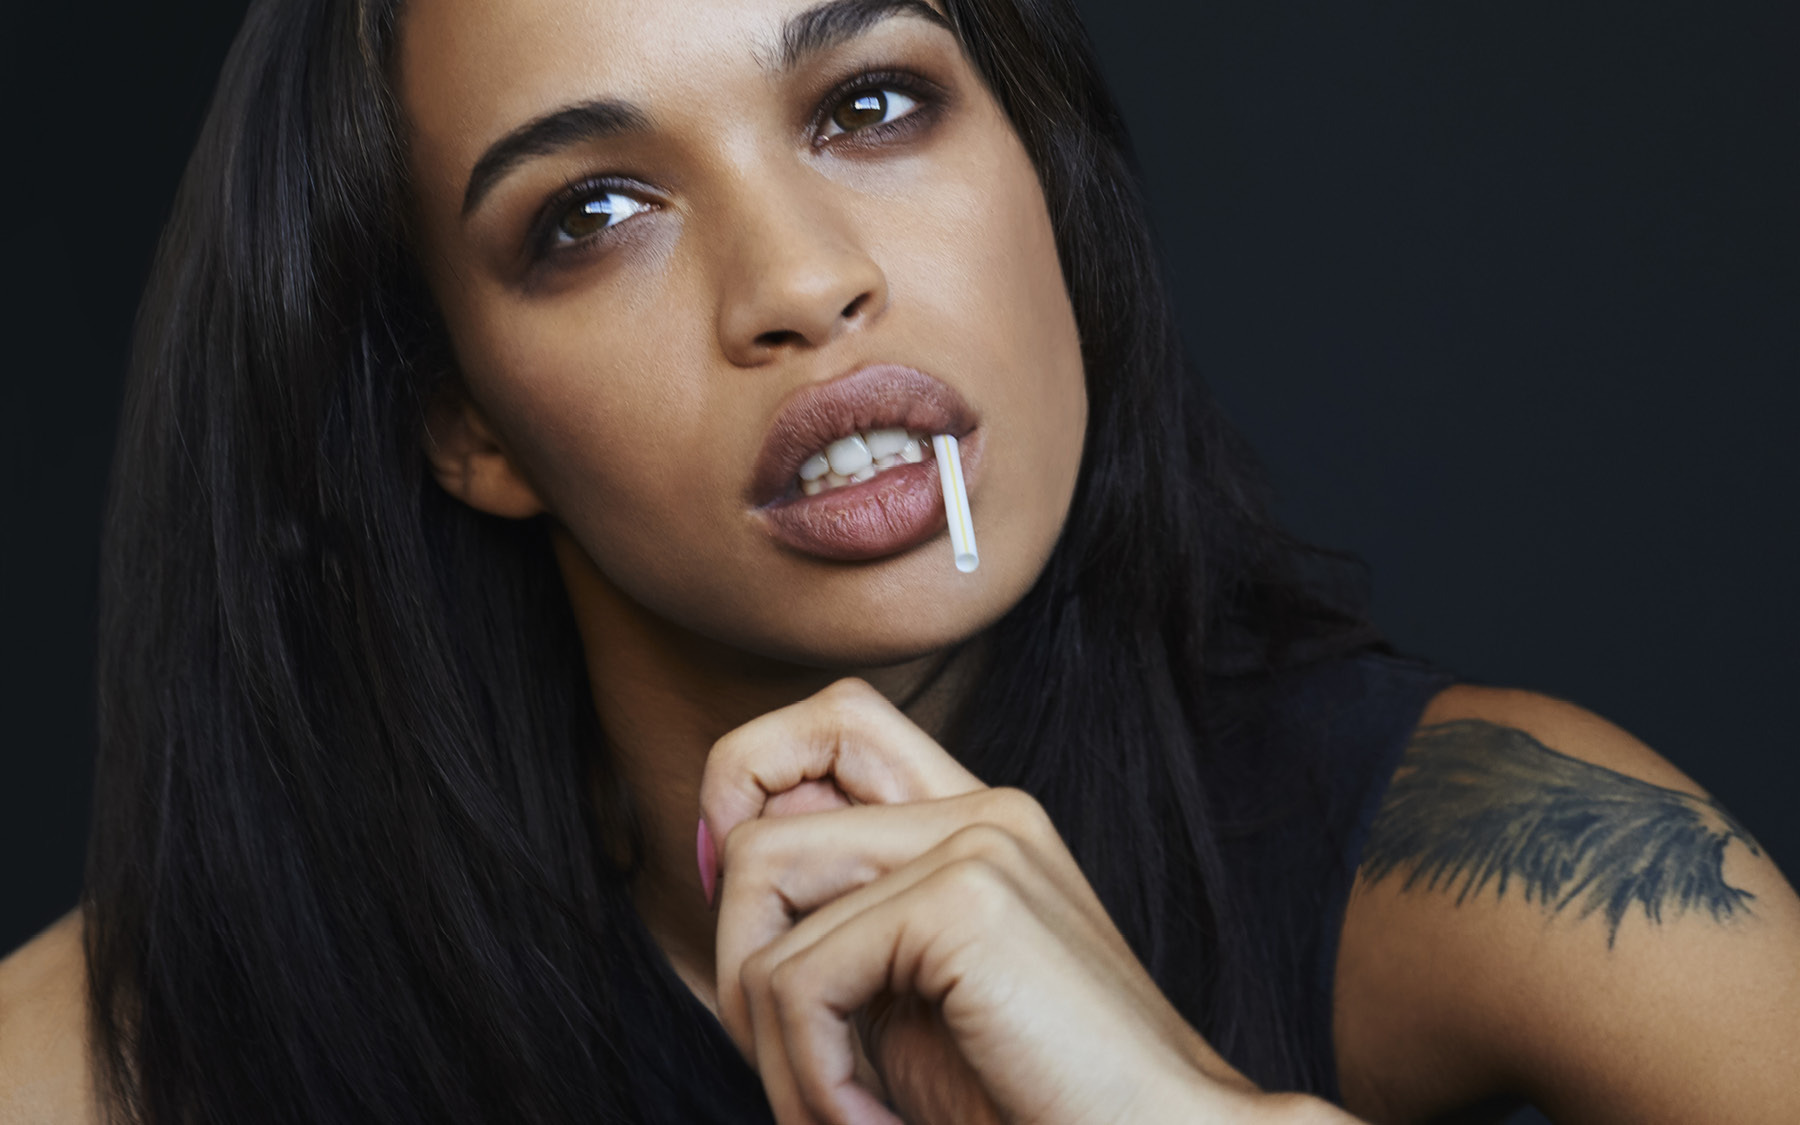 Cleopatra Coleman Wallpapers Images Photos Pictures Backgrounds Images, Photos, Reviews